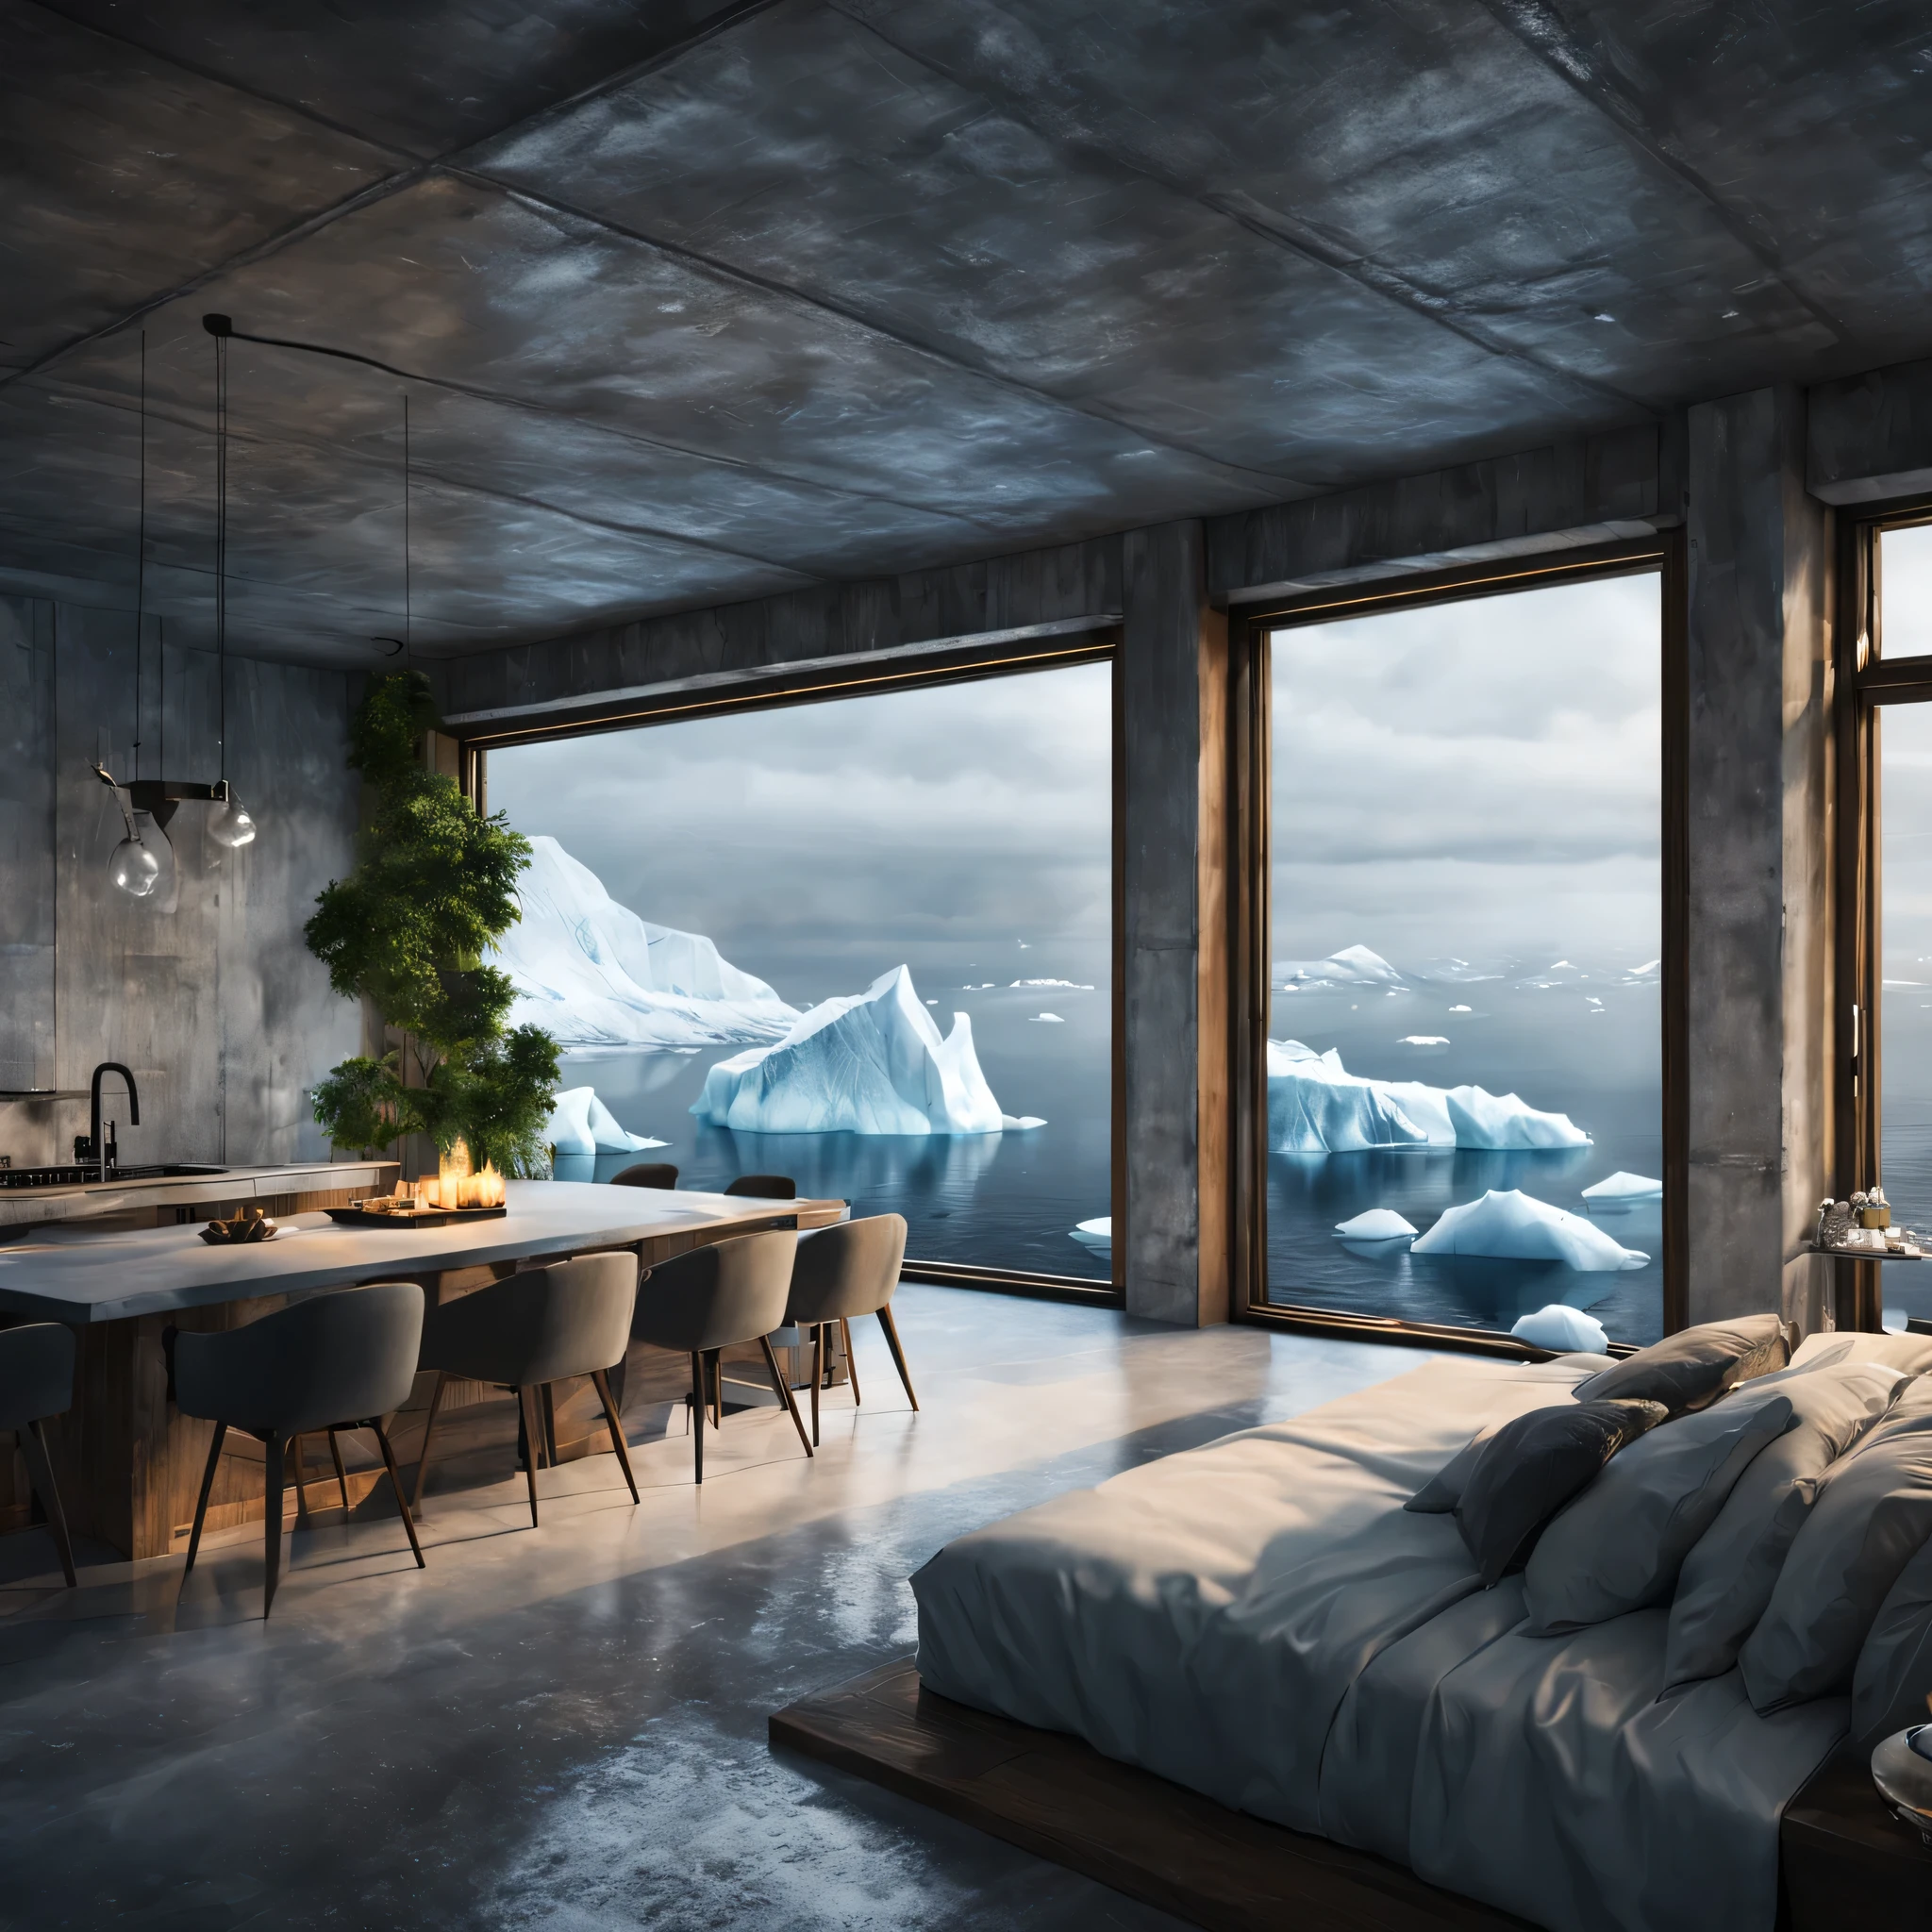 design the interior of a concrete mansion within an iceberg, surrounded by icebergs and the cold sea. Create a cozy and warm space using wooden and concrete materials, with huge glass windows offering breathtaking views. Merge modern luxury with natural elements, crafting an inviting atmosphere that harmonizes with the Arctic surroundings. Let your imagination redefine opulence against the backdrop of this frozen seascape. Cozy lights, plants, cozy environment, blizzard outside, Photoreal, ultrarealisitc, ultradetailed